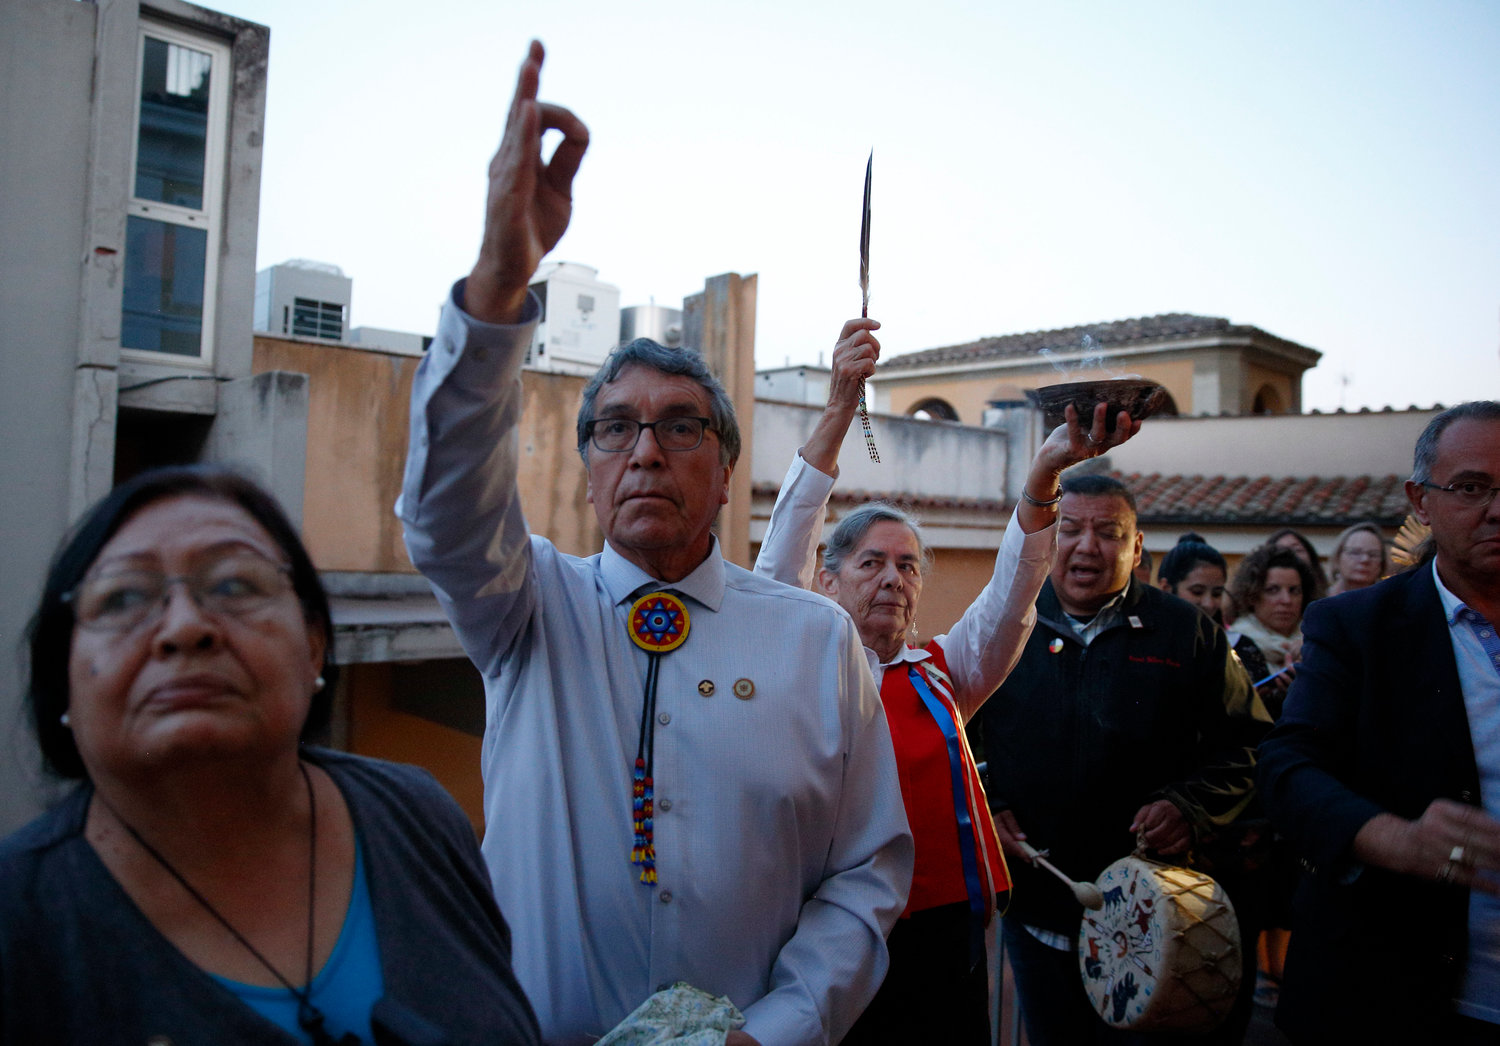 People participate in an indigenous prayer during a meeting of indigenous peoples from North and South America at the Jesuit General Curia in Rome Oct. 17, 2019. The meeting was a side event to the Synod of Bishops for the Amazon. Among those pictured from left are Rita Means, tribal council representative with the Rosebud Sioux Tribe; Rodney Bordeaux, president of the Rosebud Sioux Tribe; and Sister Priscilla Soloman, a member of the Ojibway people and of the Sisters of St. Joseph of Sault Ste. Marie in Ontario, Canada.